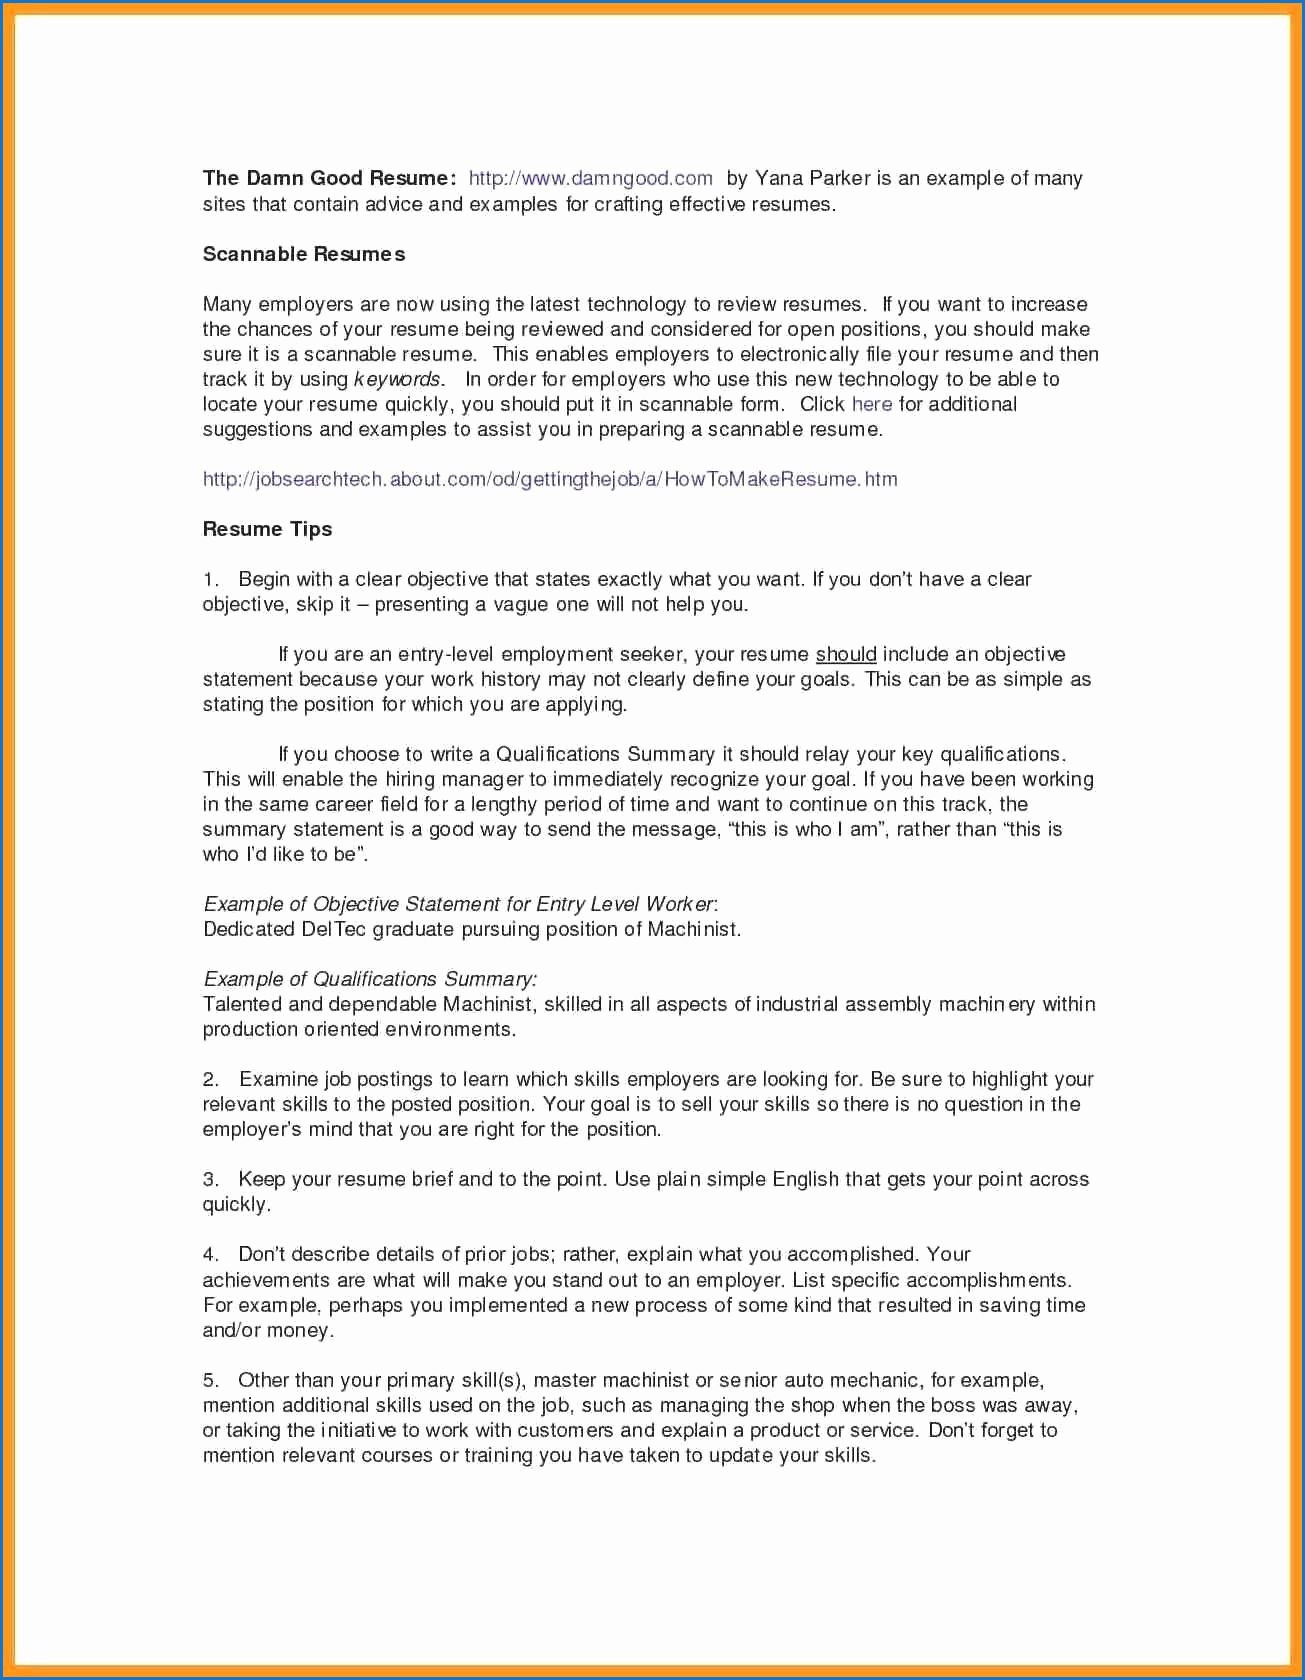 How To Write A Good Resume Resumes With No Job Experience Sample 11 Examples A Good Resume With No Work Experience Resume Collection Of Resumes With No Job Experience how to write a good resume|wikiresume.com